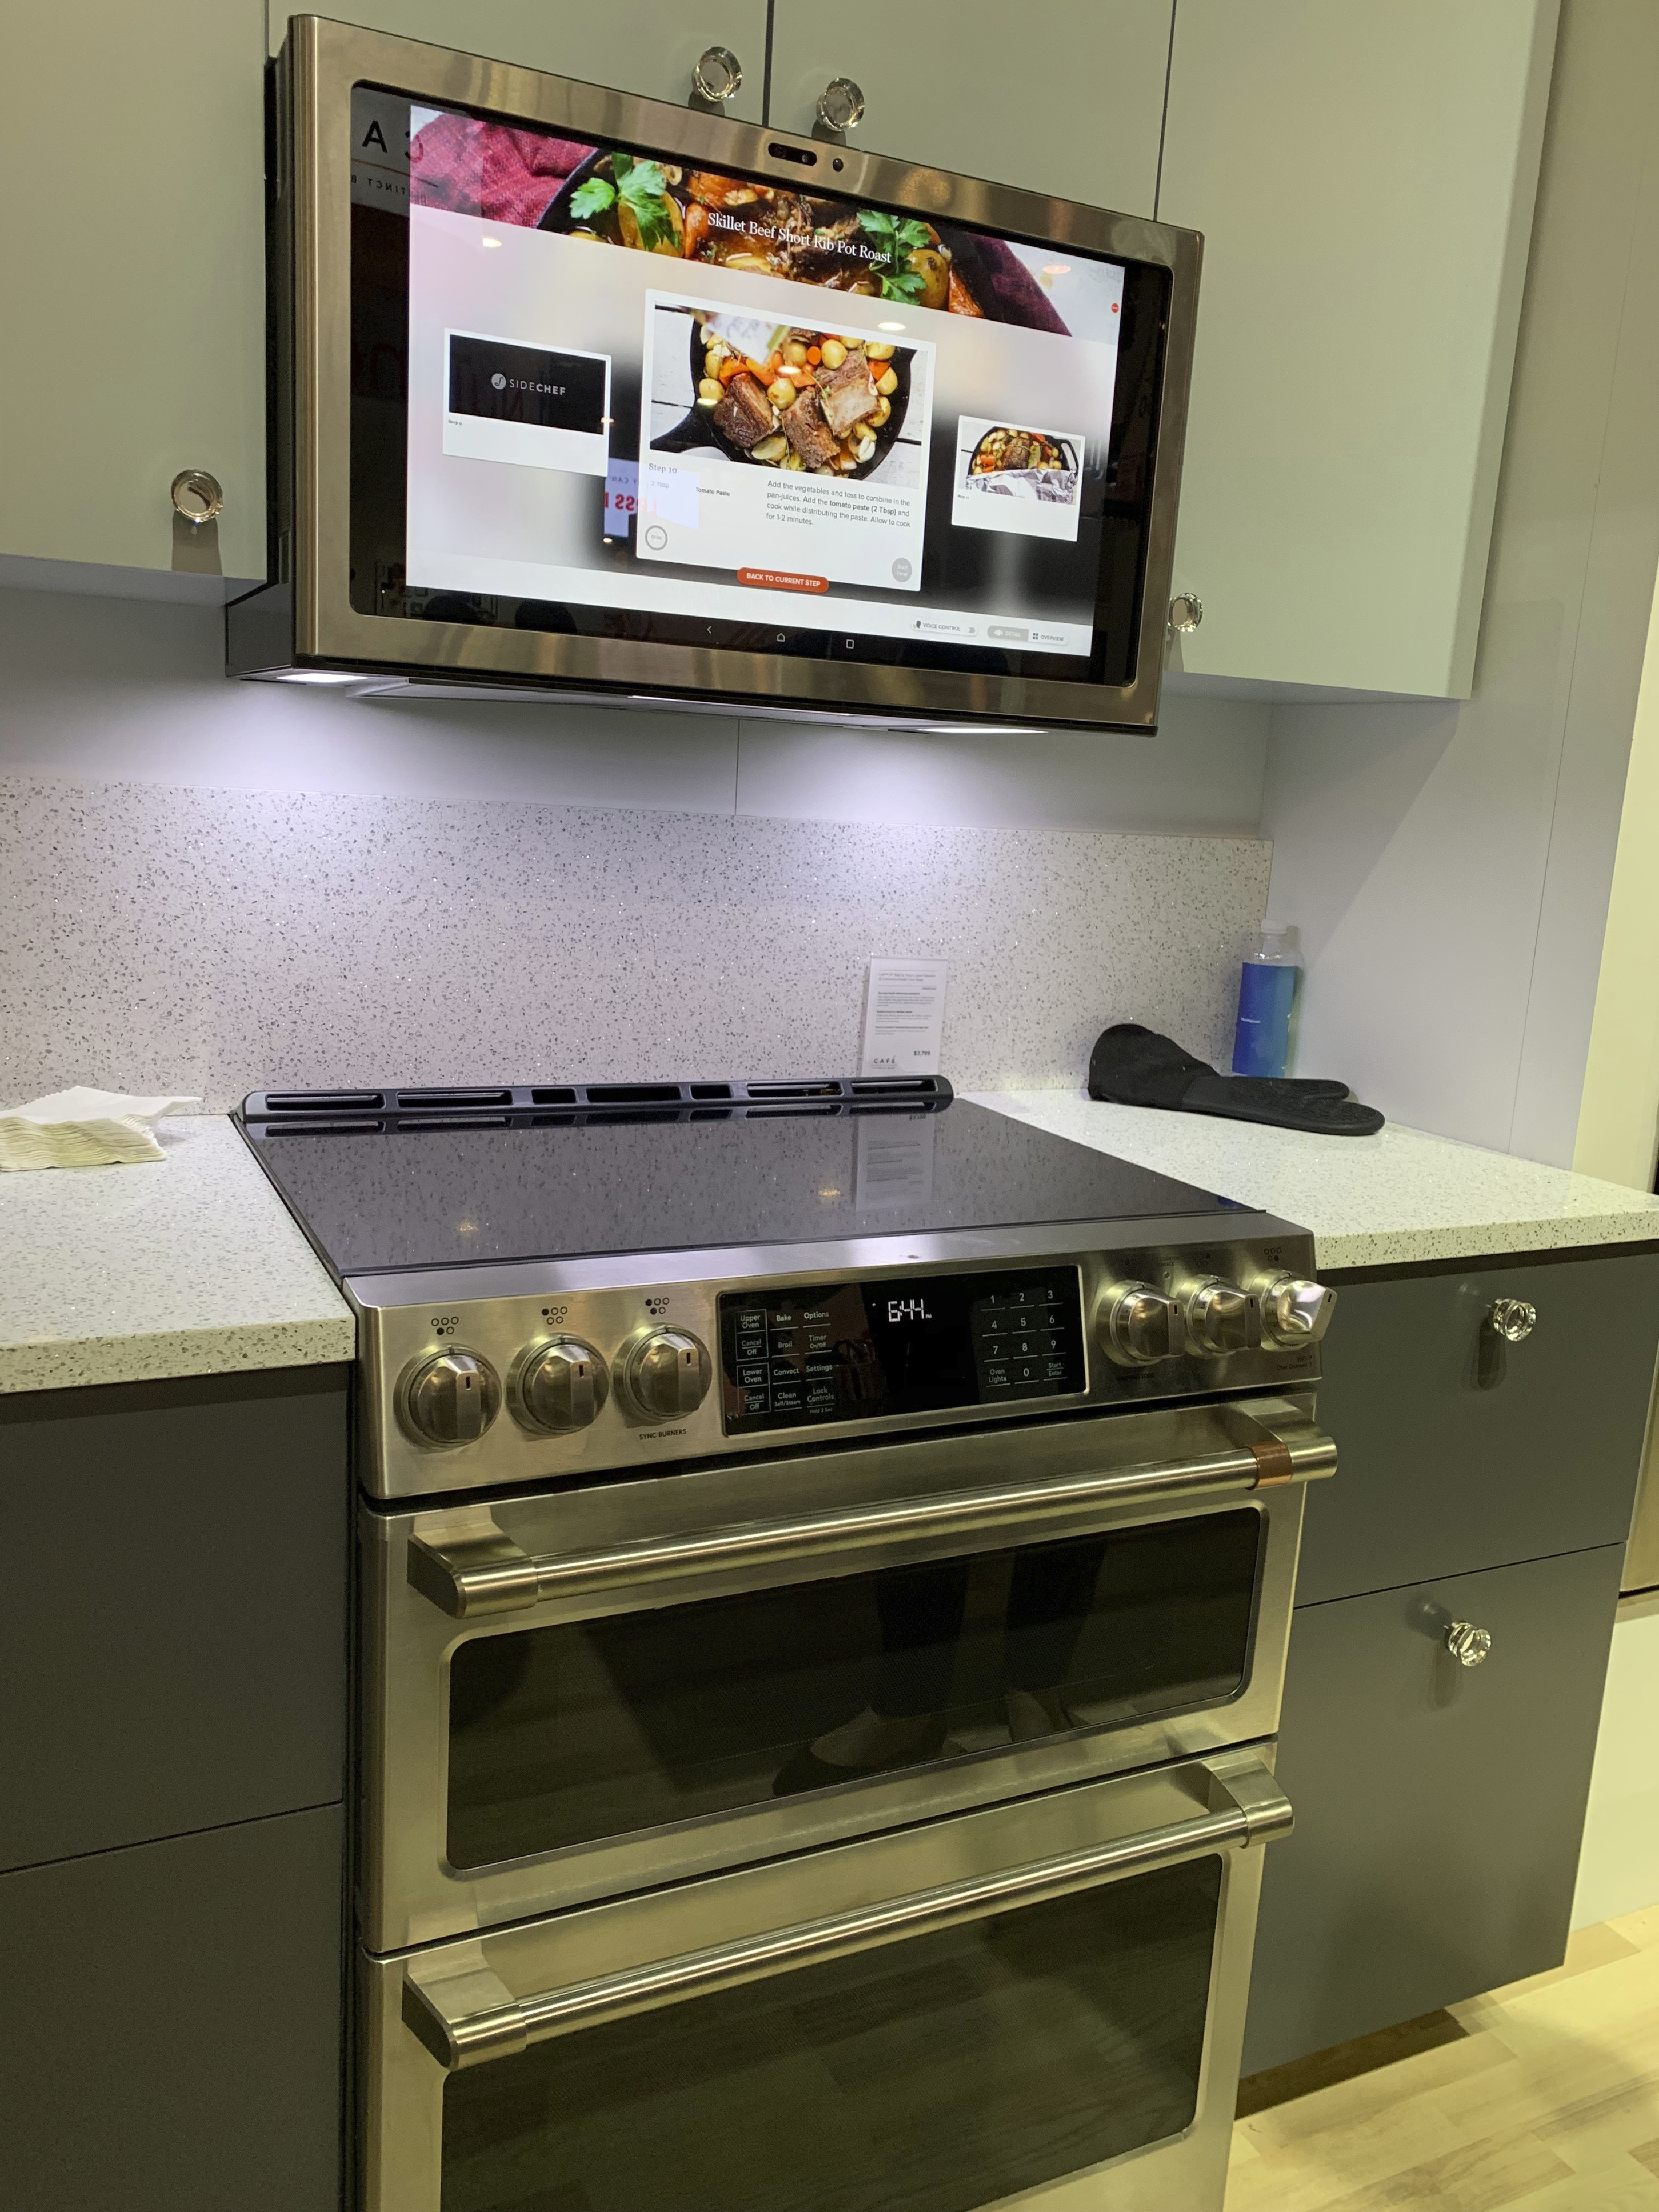 This Feb. 23, 2019 photo shows the GE Profile Kitchen Hub. The vent hood also works as touchscreen or voice-assistant tablet. Built-in cameras let the cook post food or video of what's on the stove, or in front of the hood. (Karen Schwartz via AP)